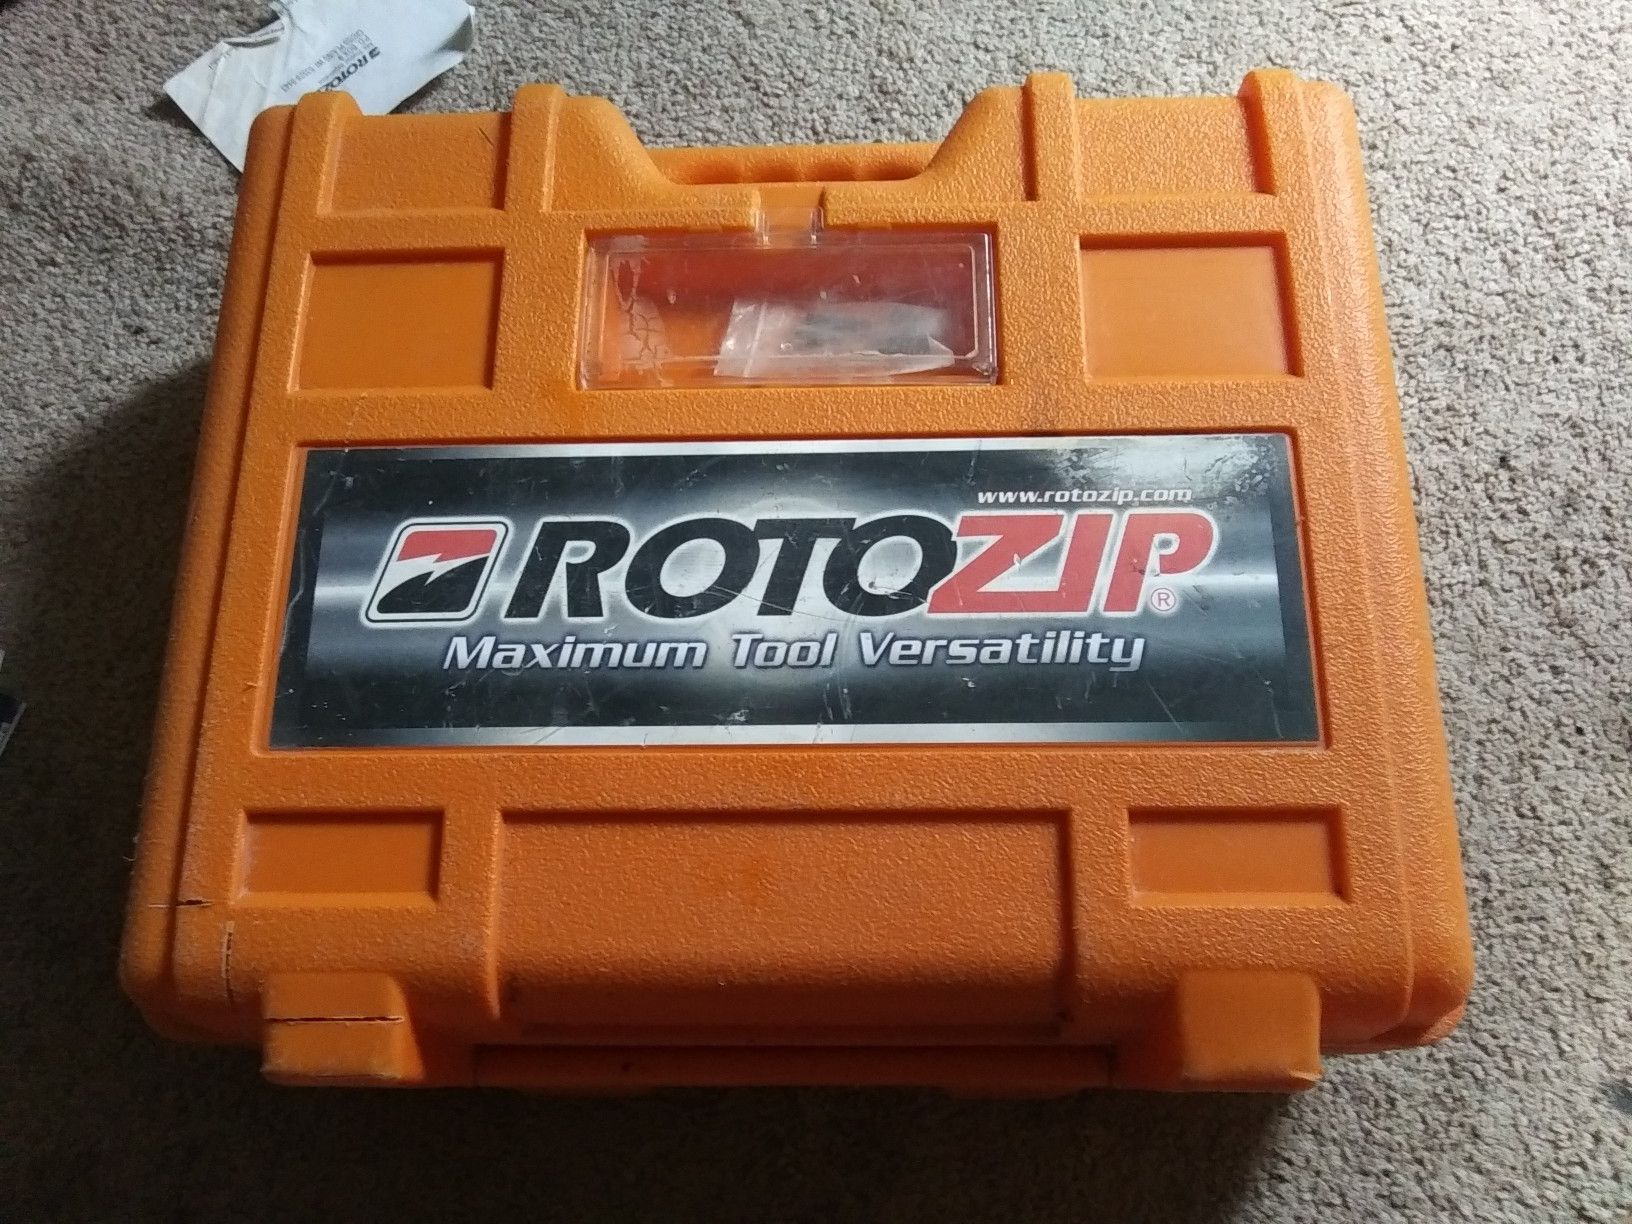 2 Rotozip saws with case and attachments